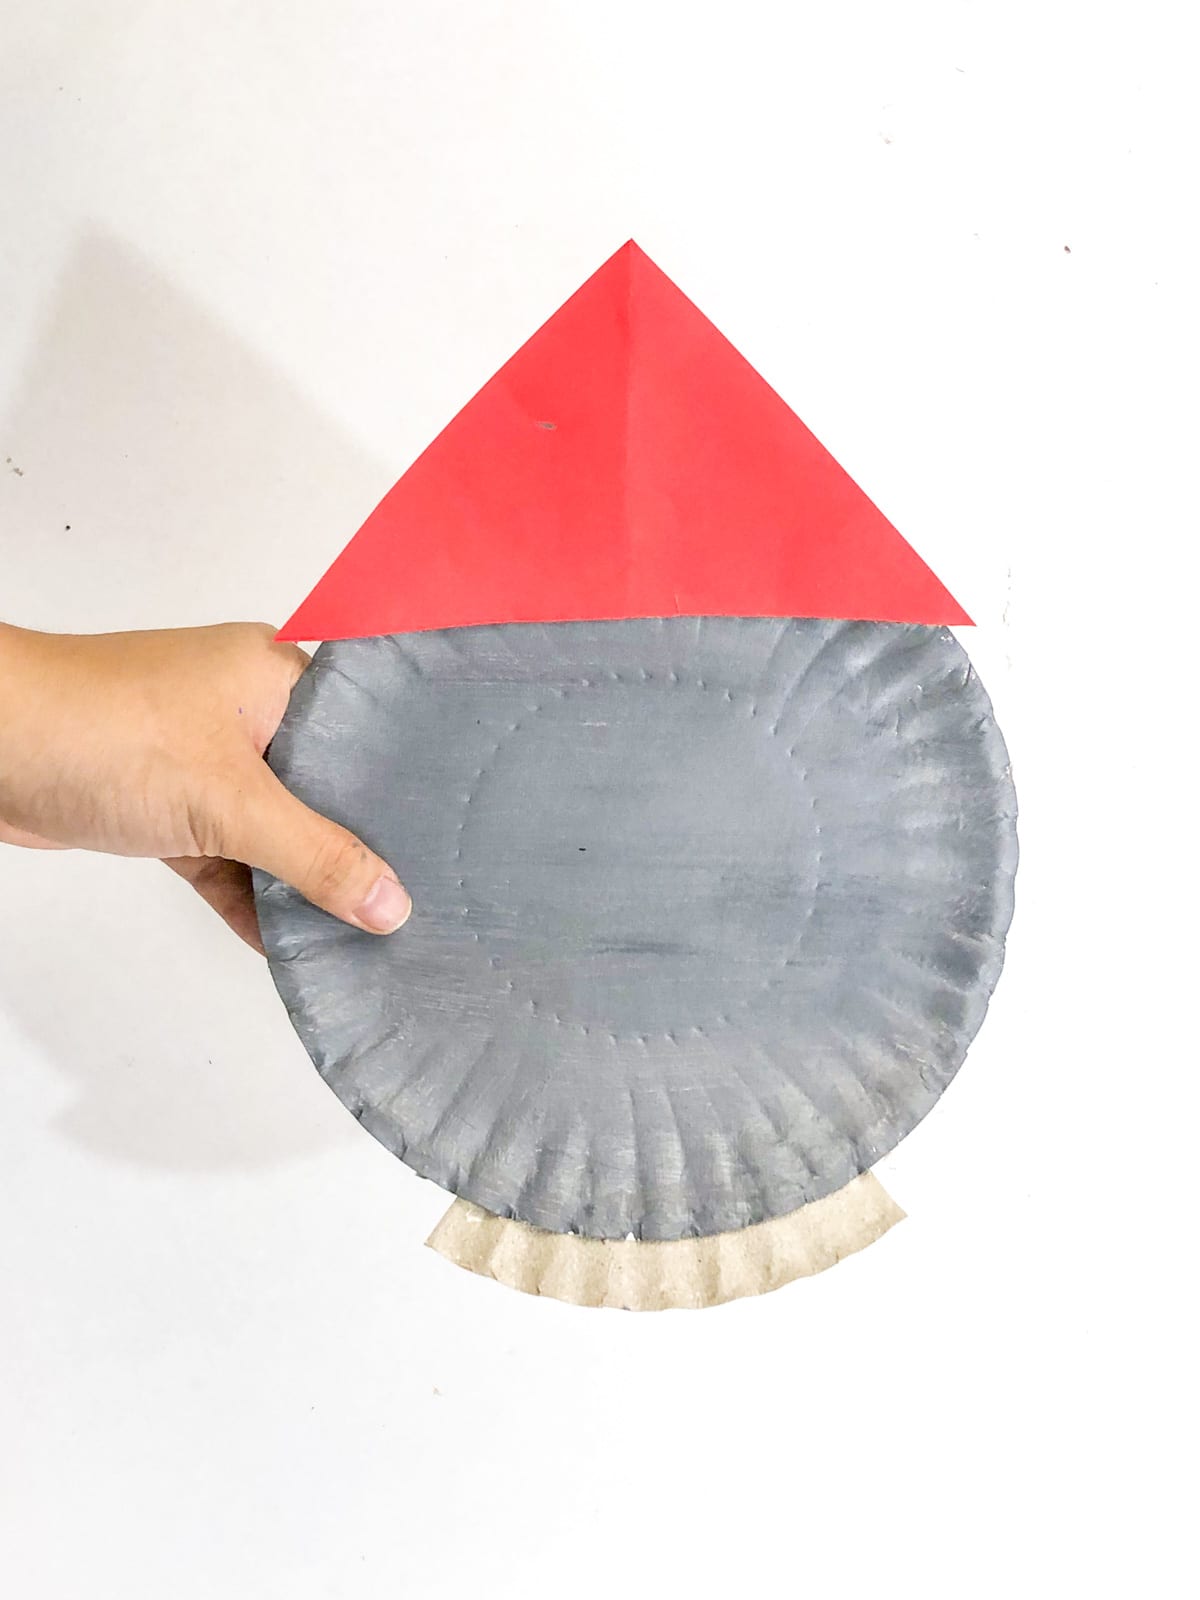 glue second paper plate to back of rocket ship